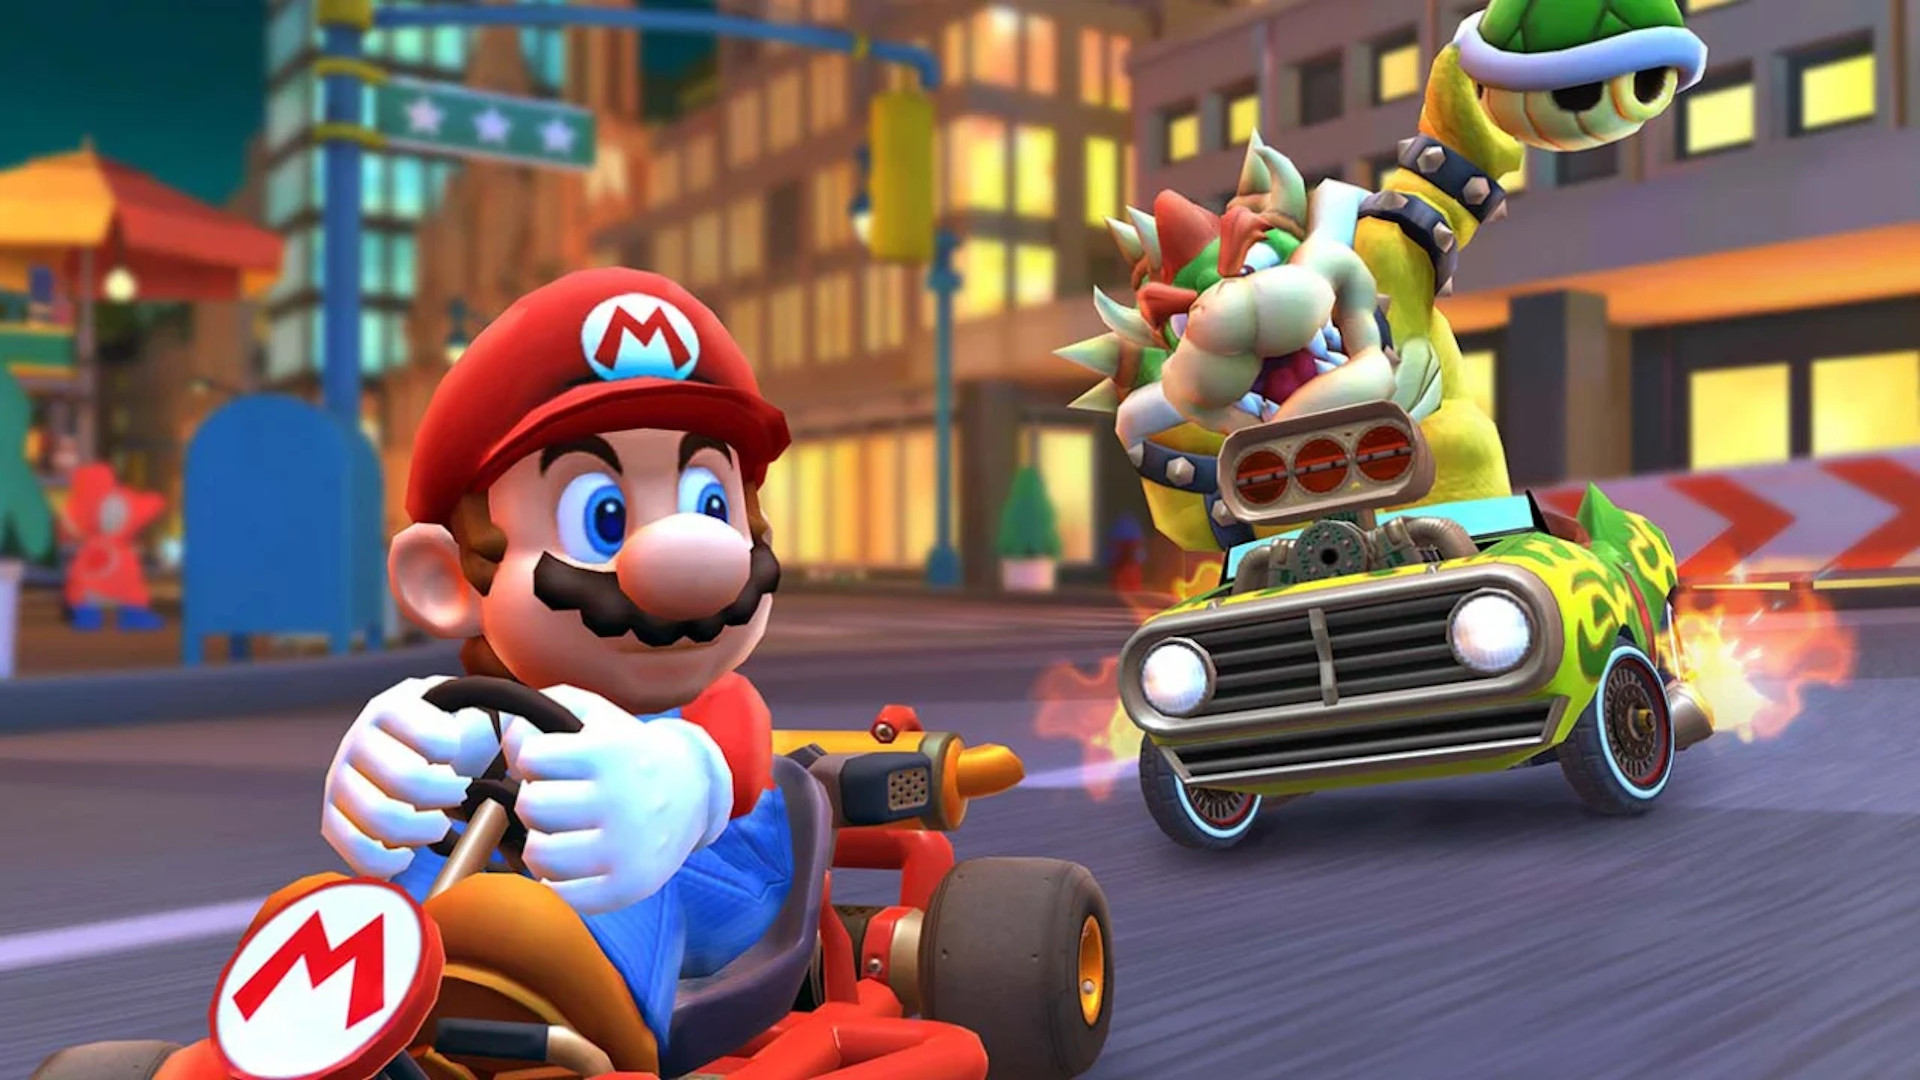 MArio Kart 8 Deluxe best kart: Mario swerves as Bowser hunts him down with a shell